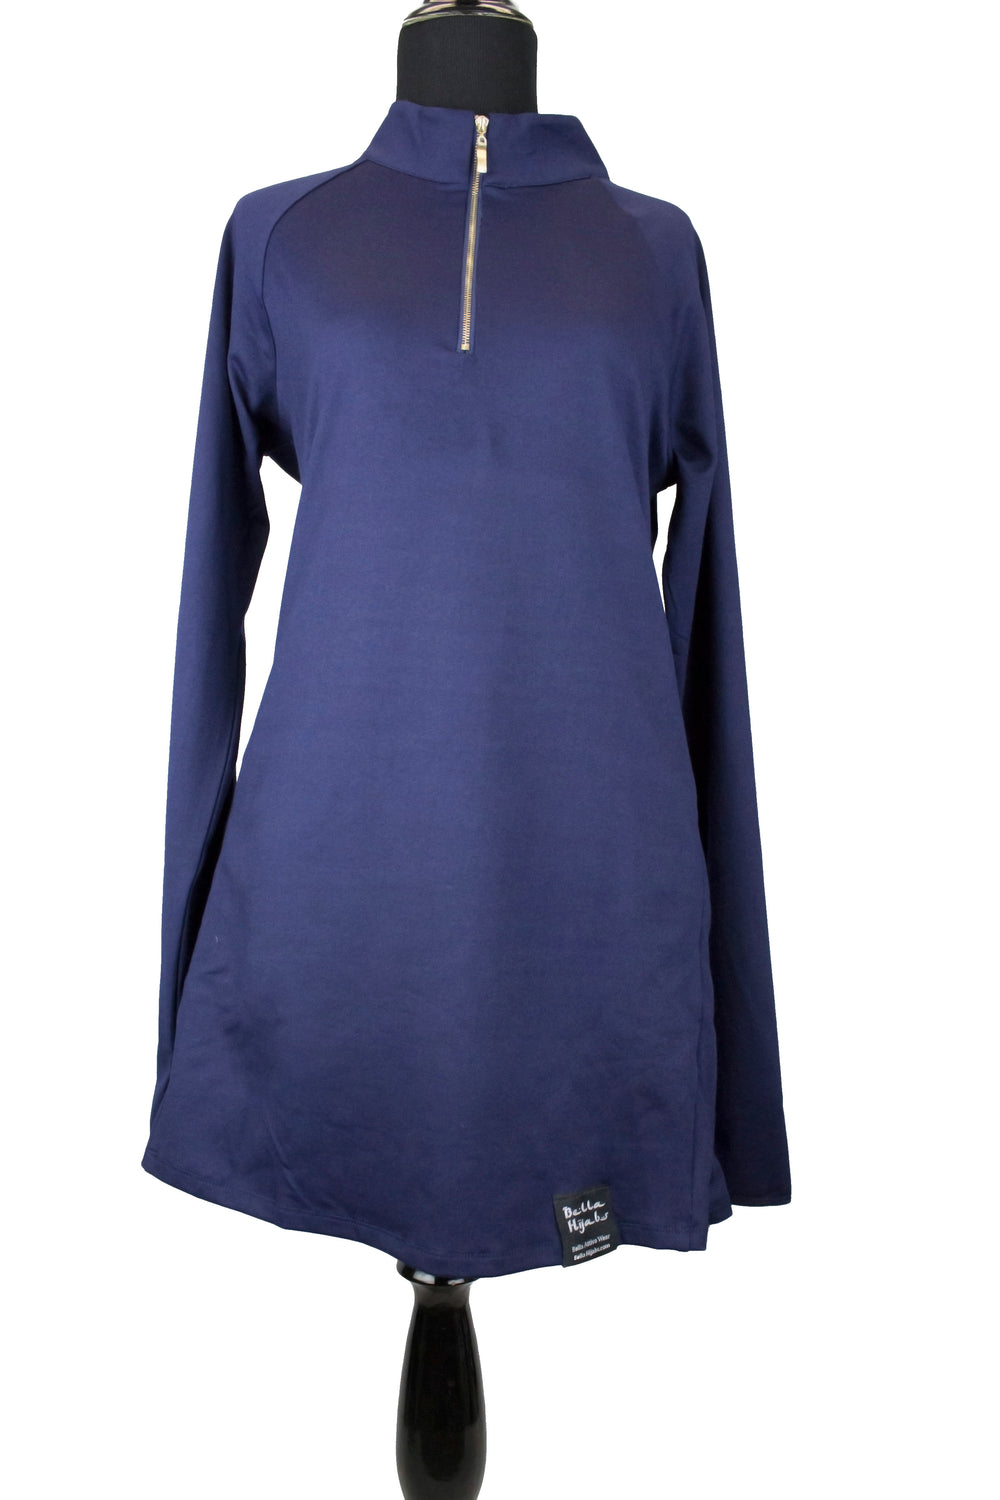 modest navy half zip work out top with long sleeves